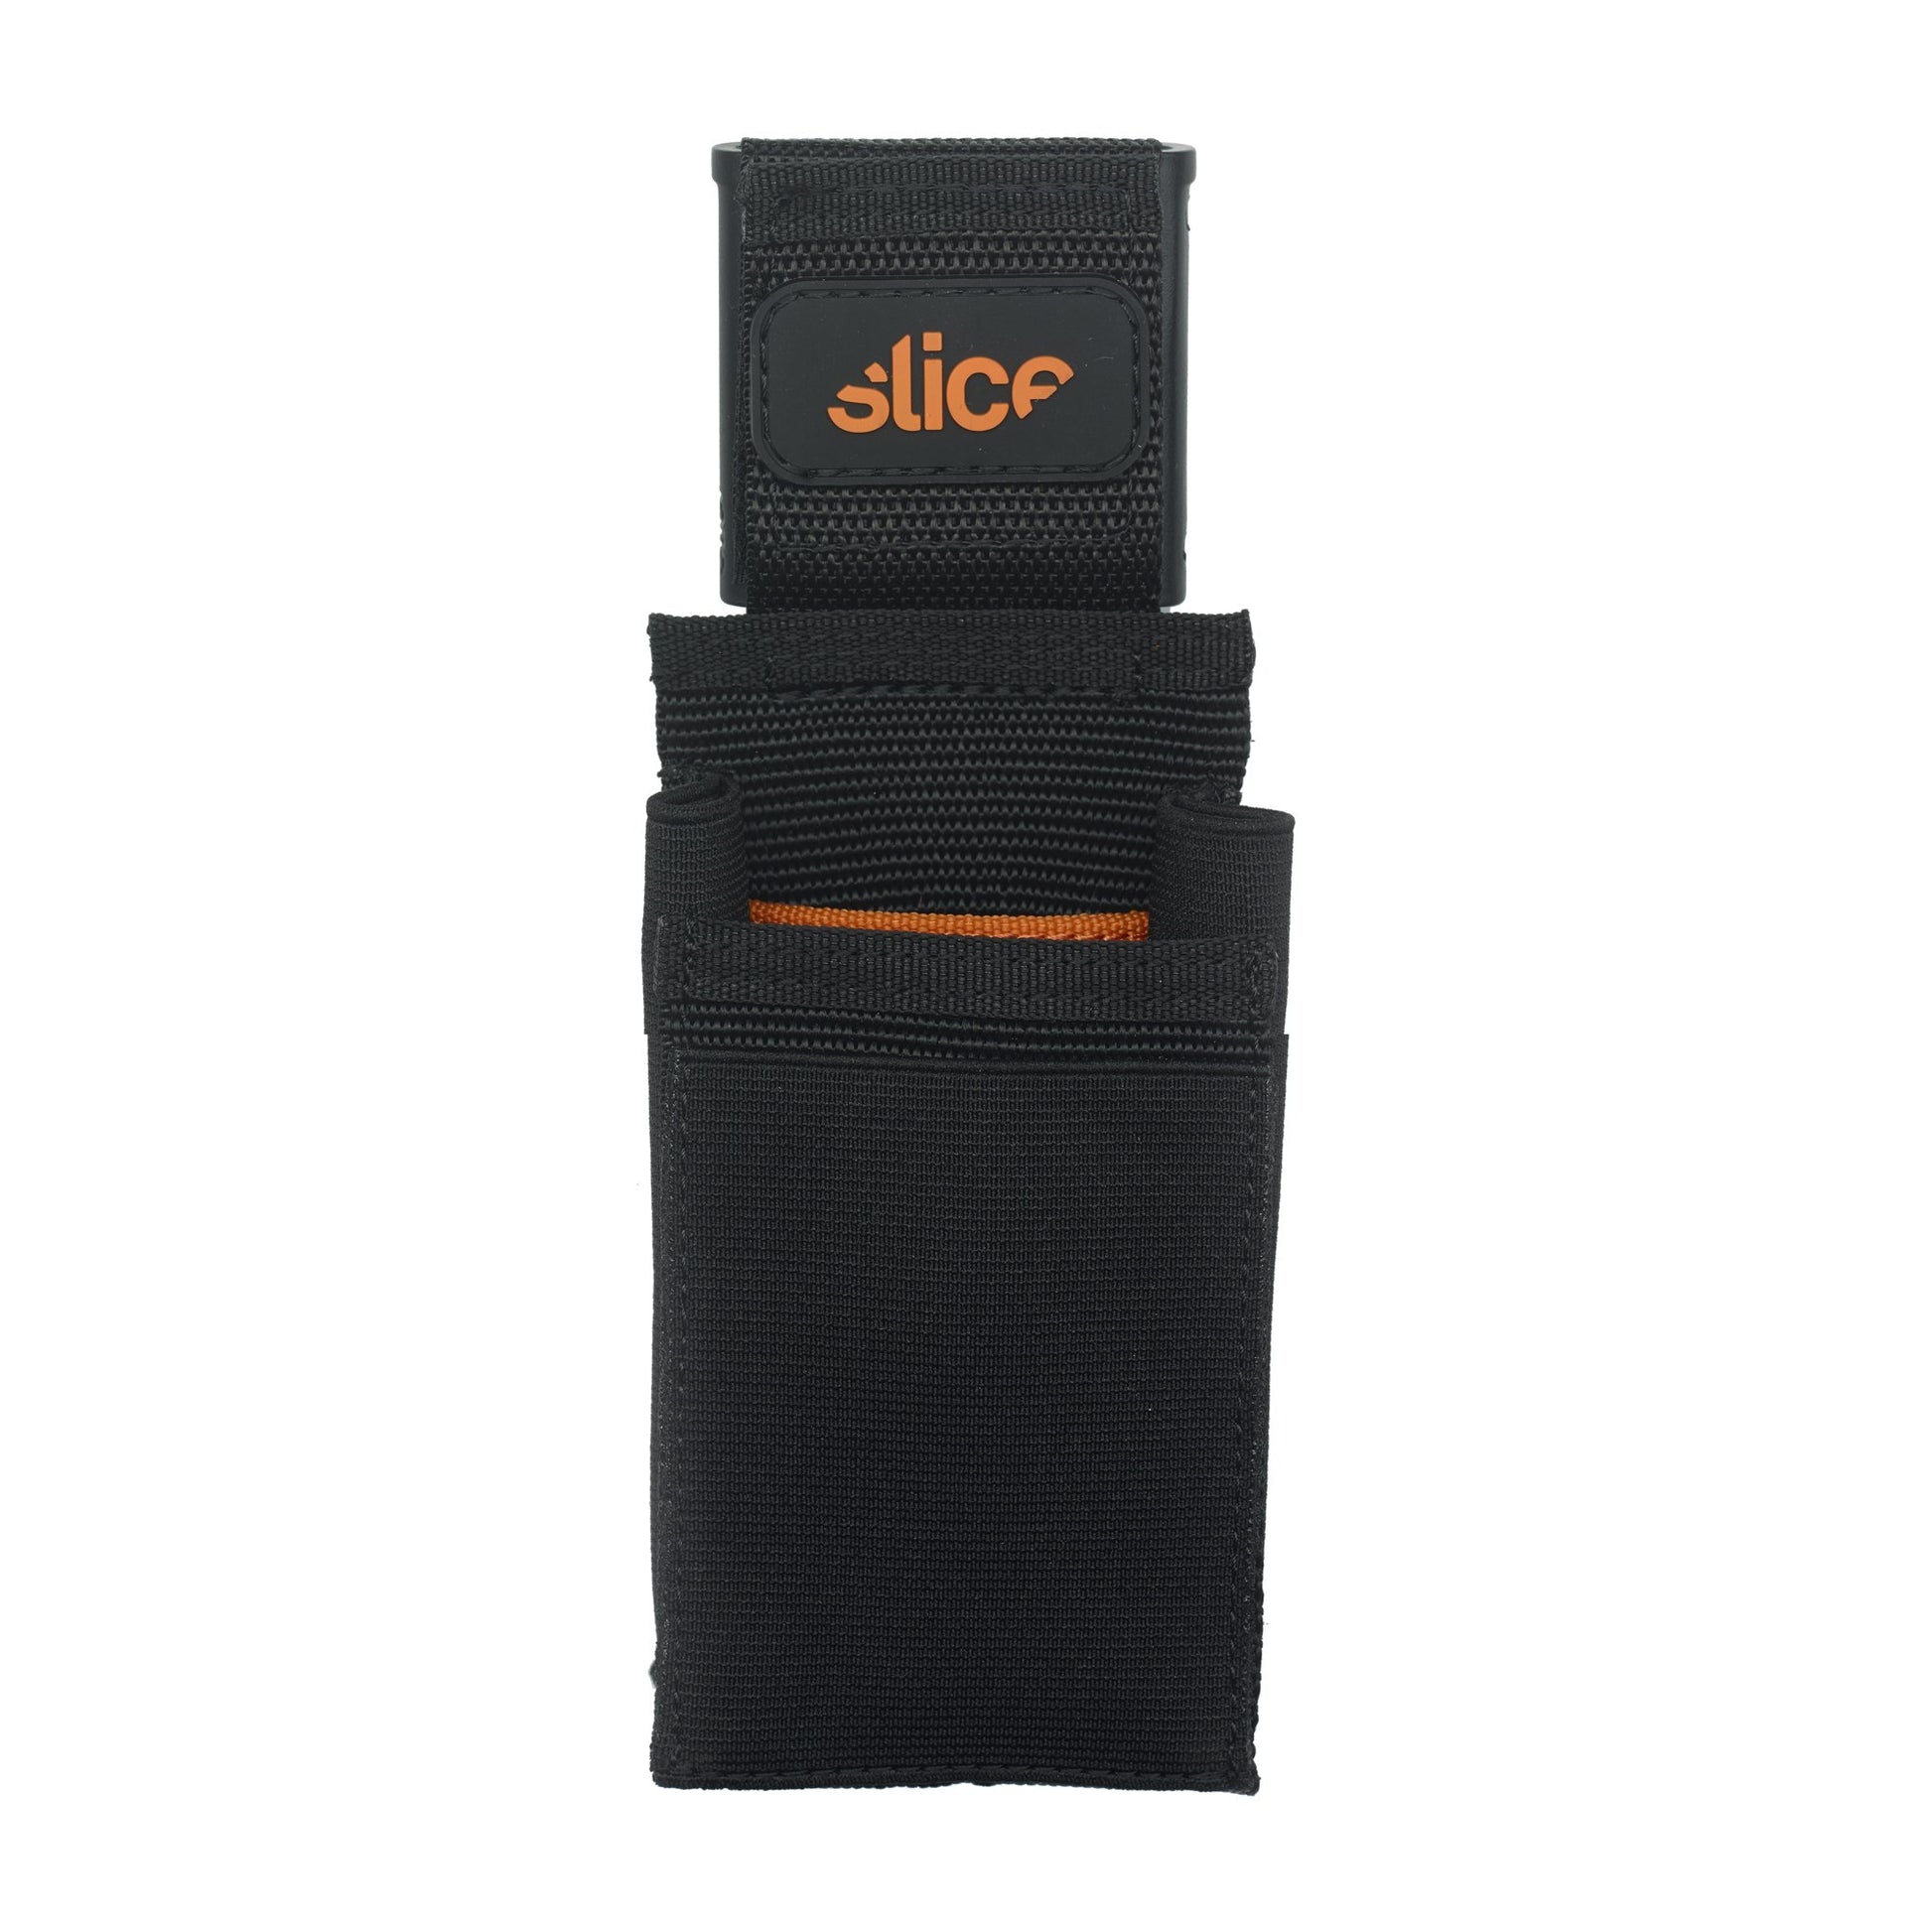 The Slice® 10516 Tool Holster